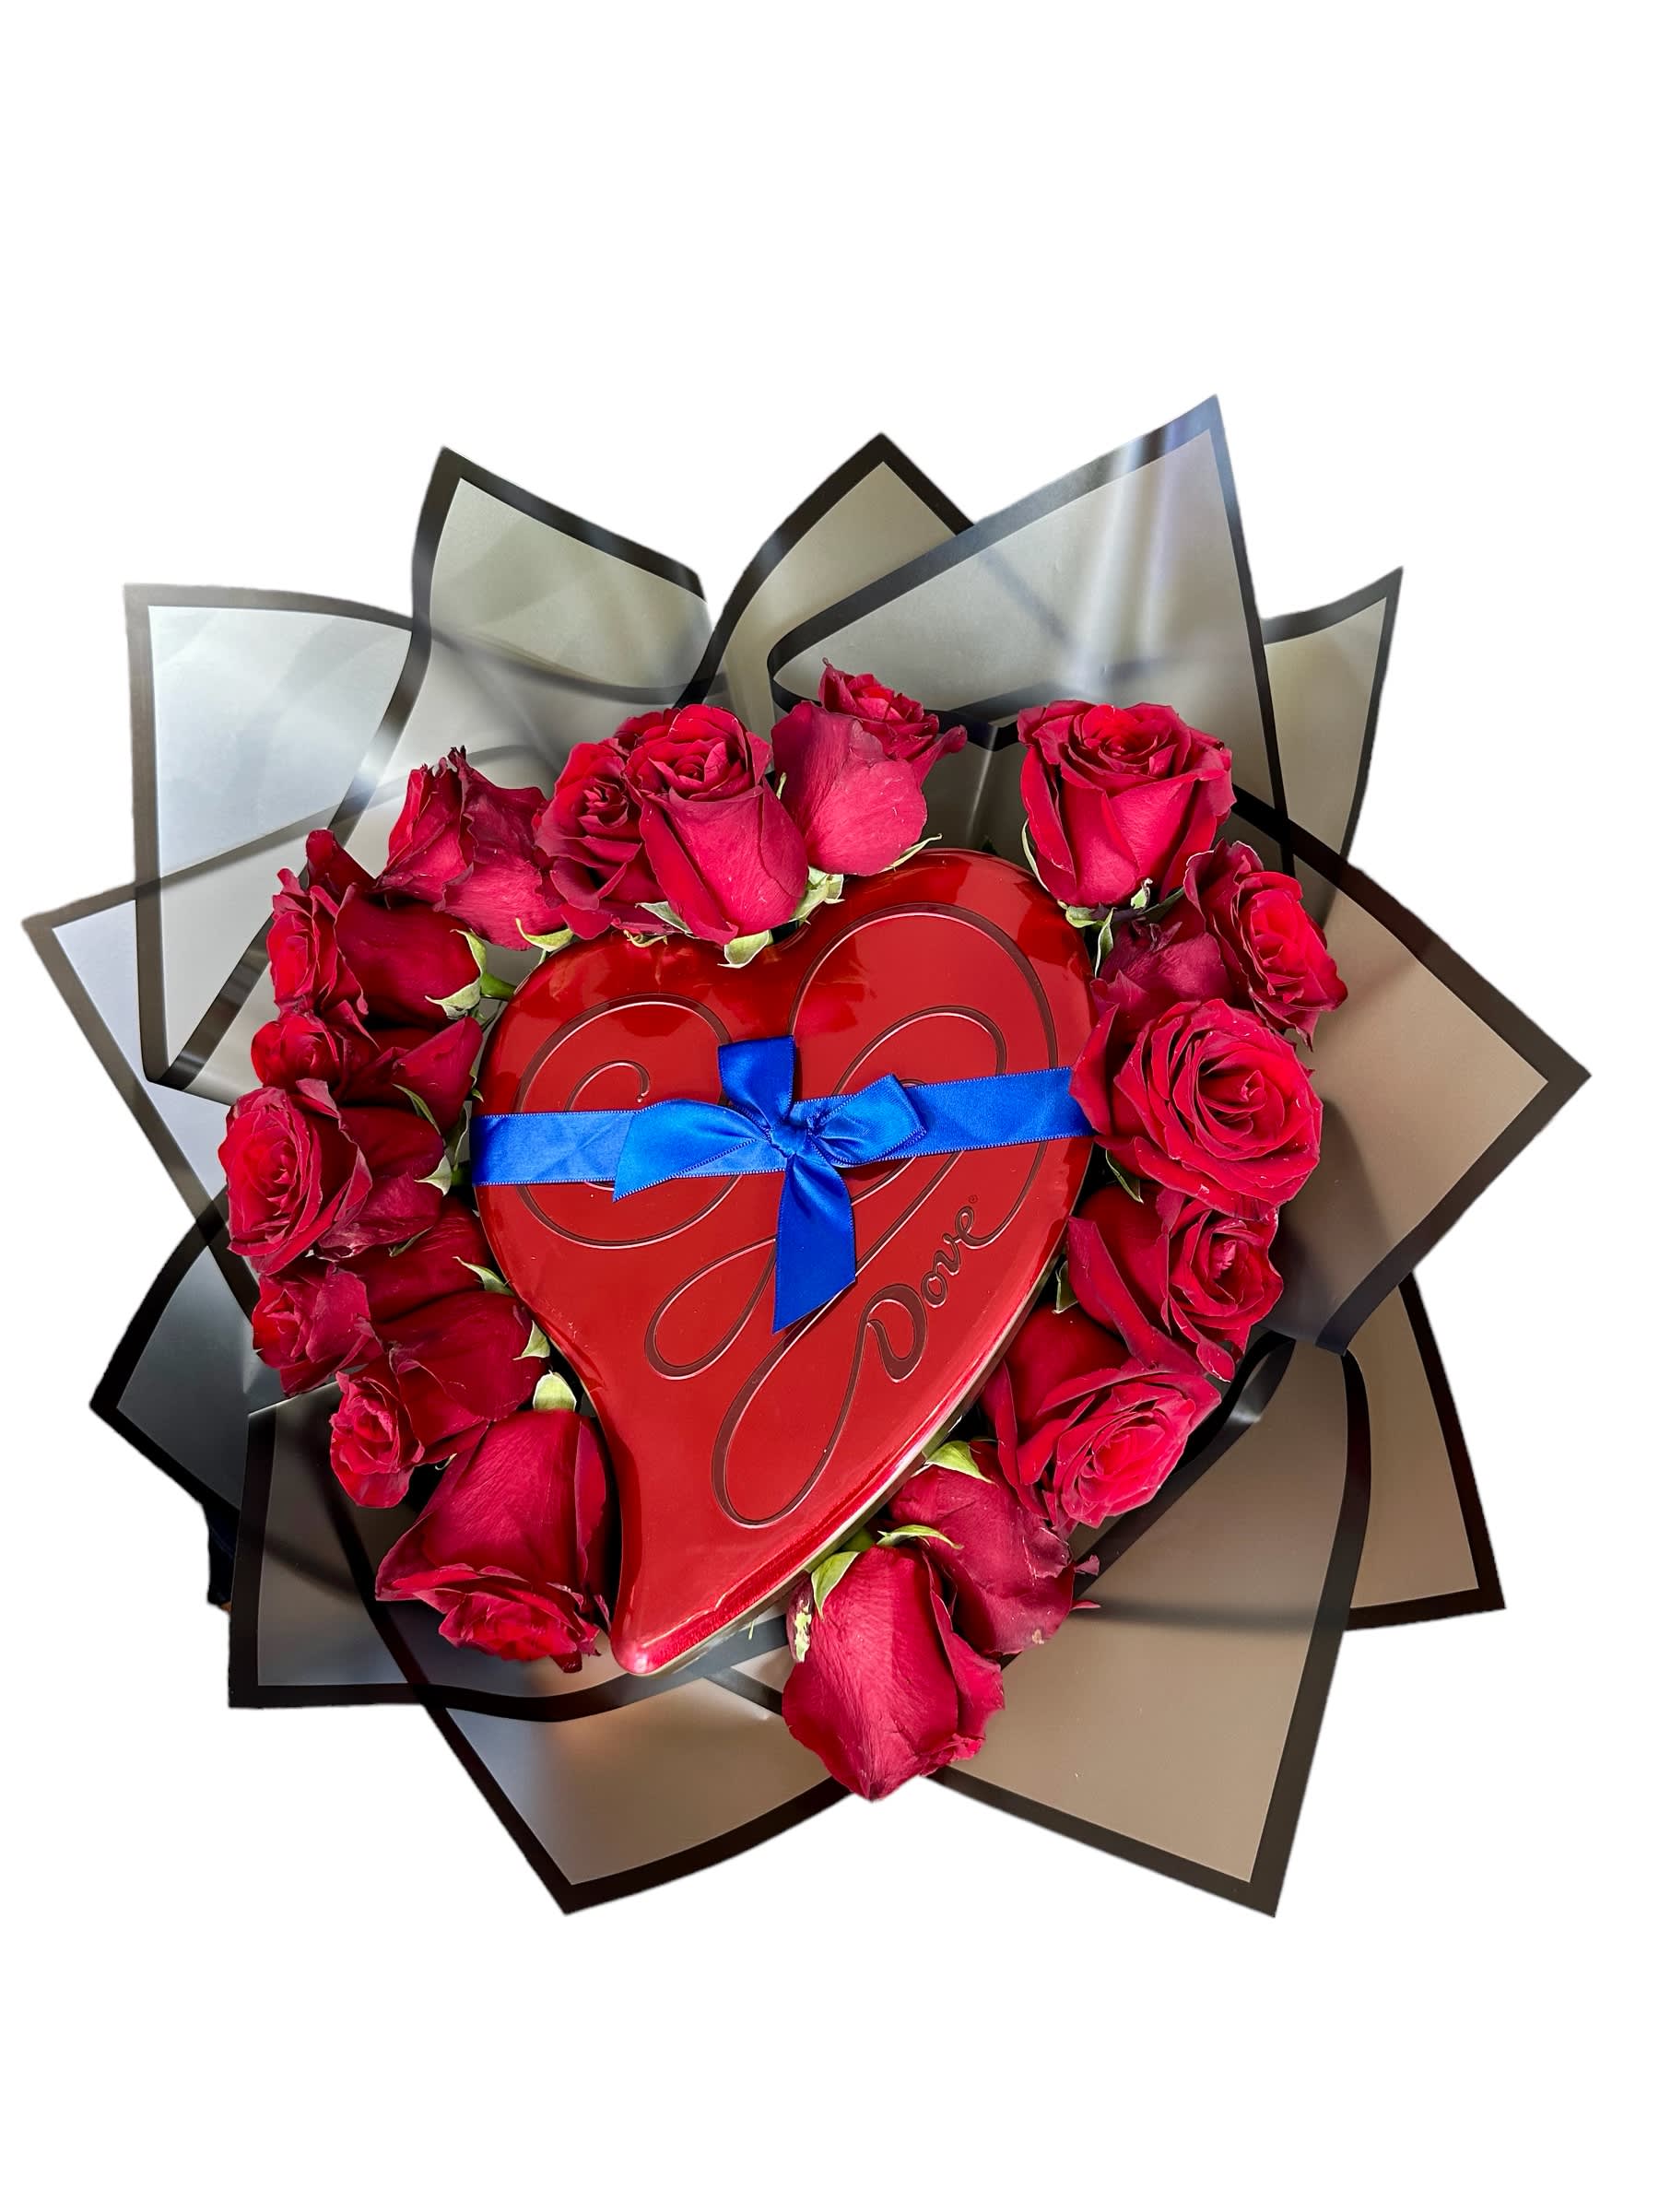 Chaney´s Red and Sweet - Bouquet of fresh 19 cut red roses arranged with a center heart of Dove chocolates. A special surprise for many occasions!